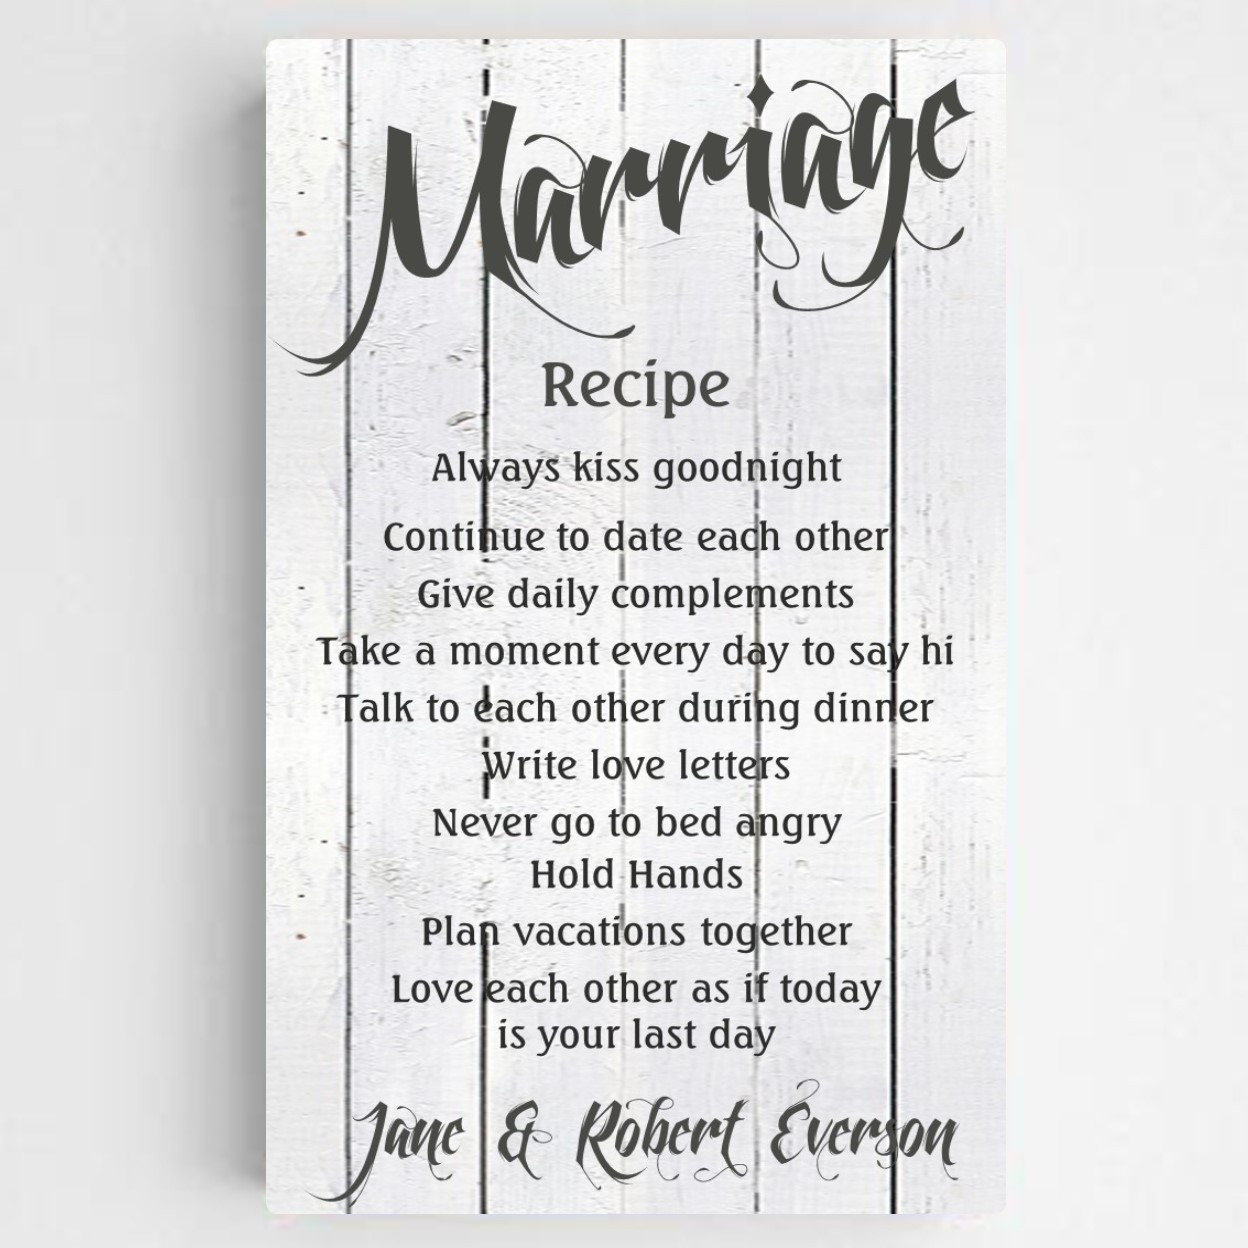 50 Years Of Marriage Quotes
 50th Wedding Anniversary Quotes For Golden Couples